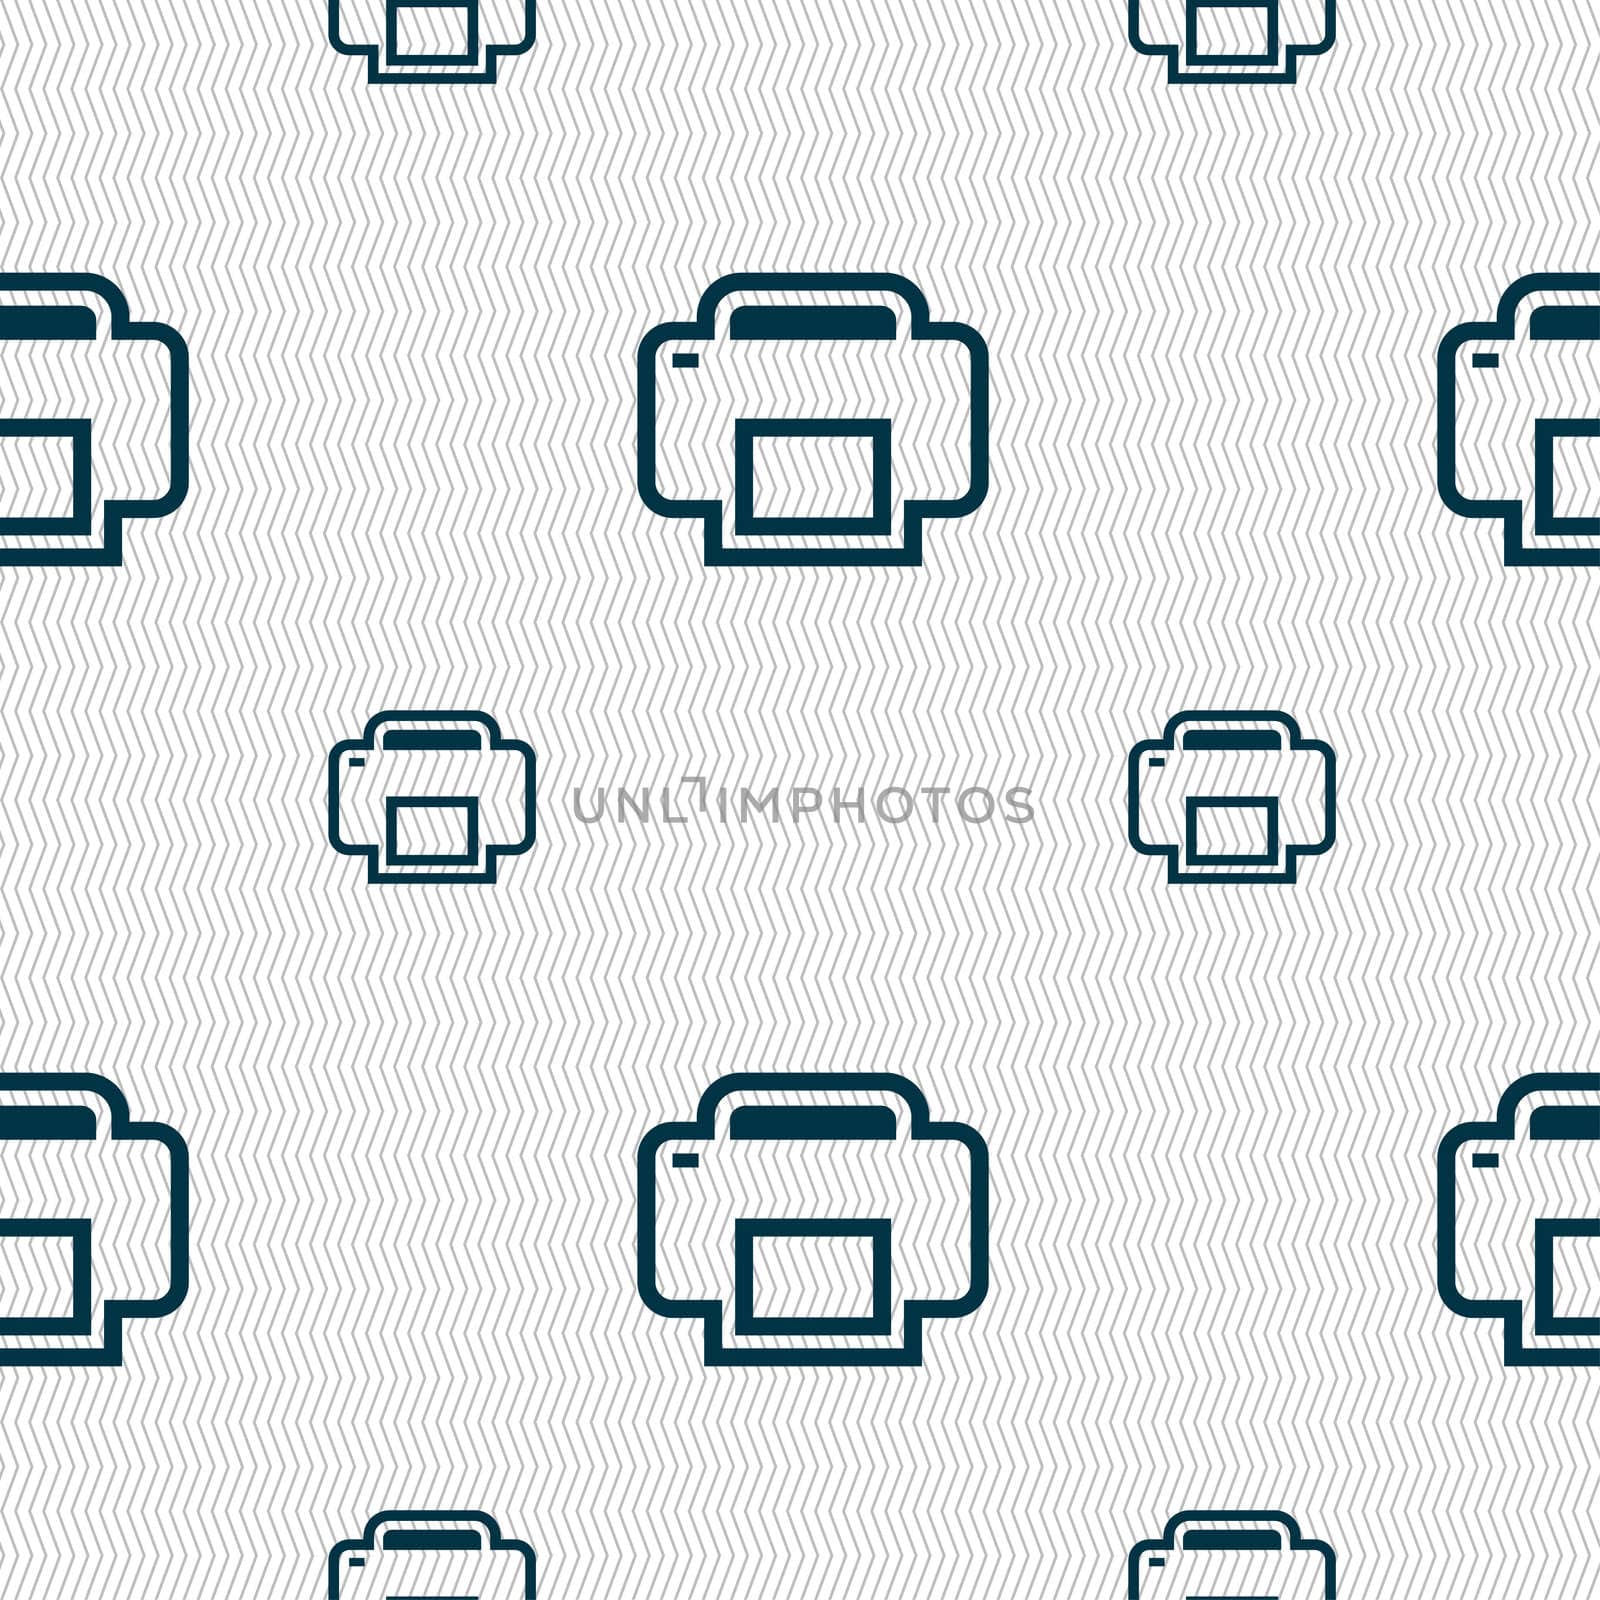 Printing icon sign. Seamless pattern with geometric texture. illustration